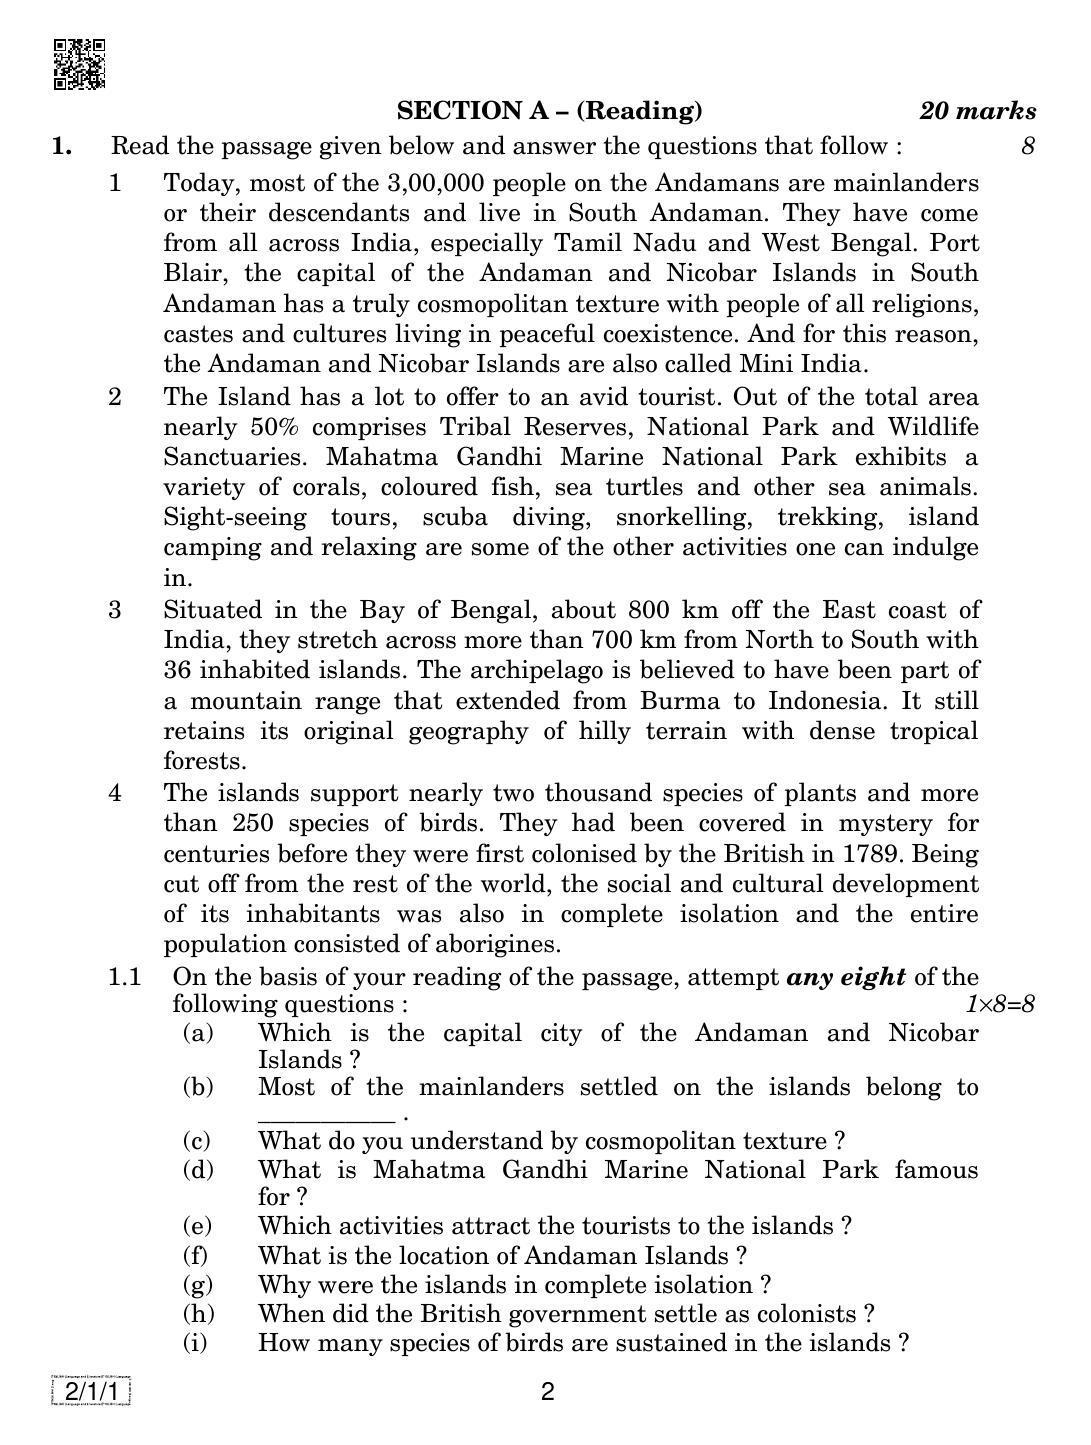 CBSE Class 10 2-1-1 ENGLISH LANG. & LIT. 2019 Compartment Question Paper - Page 2